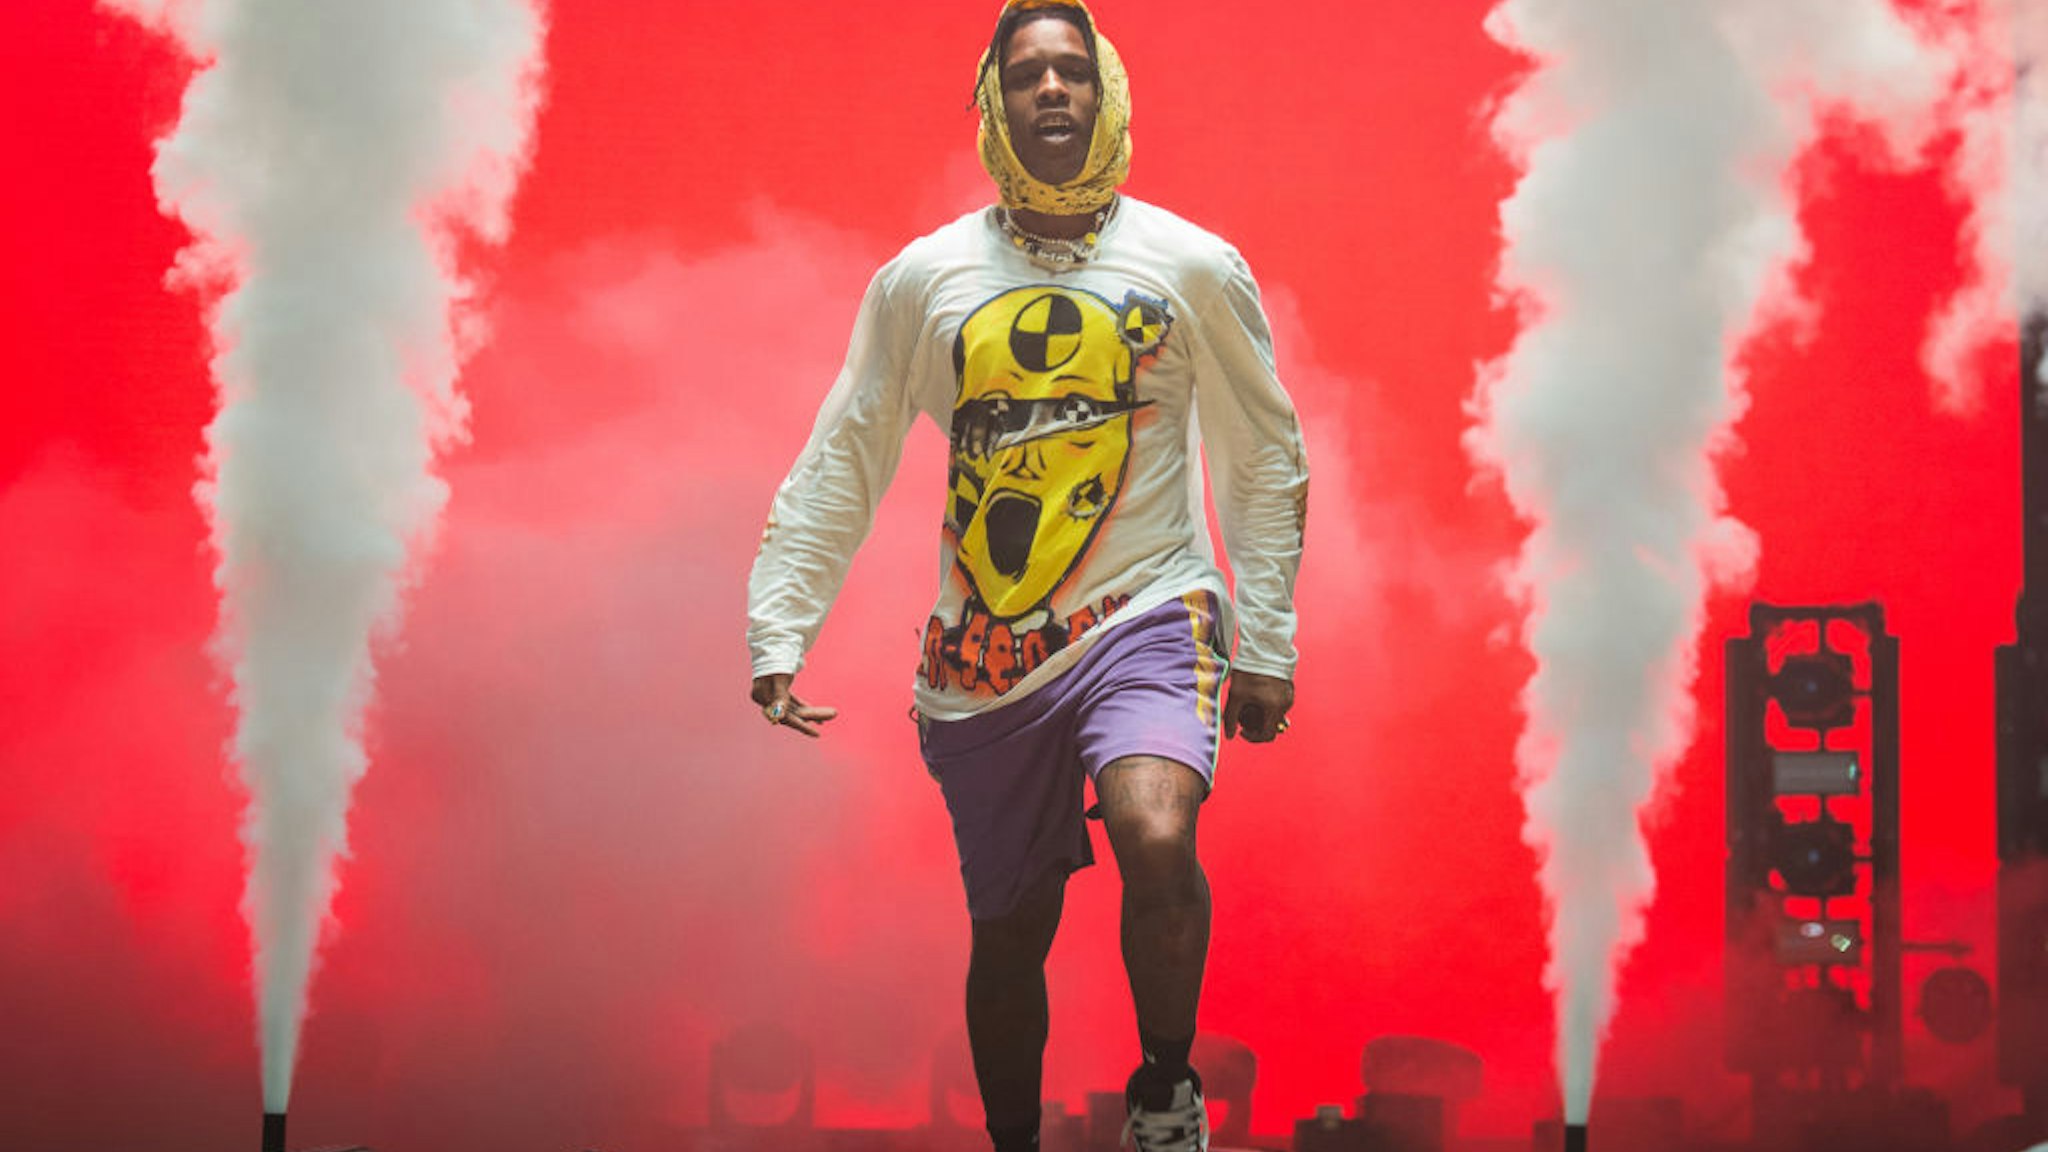 A$AP Rocky performs at Le Zenith on June 27, 2019 in Paris, France.